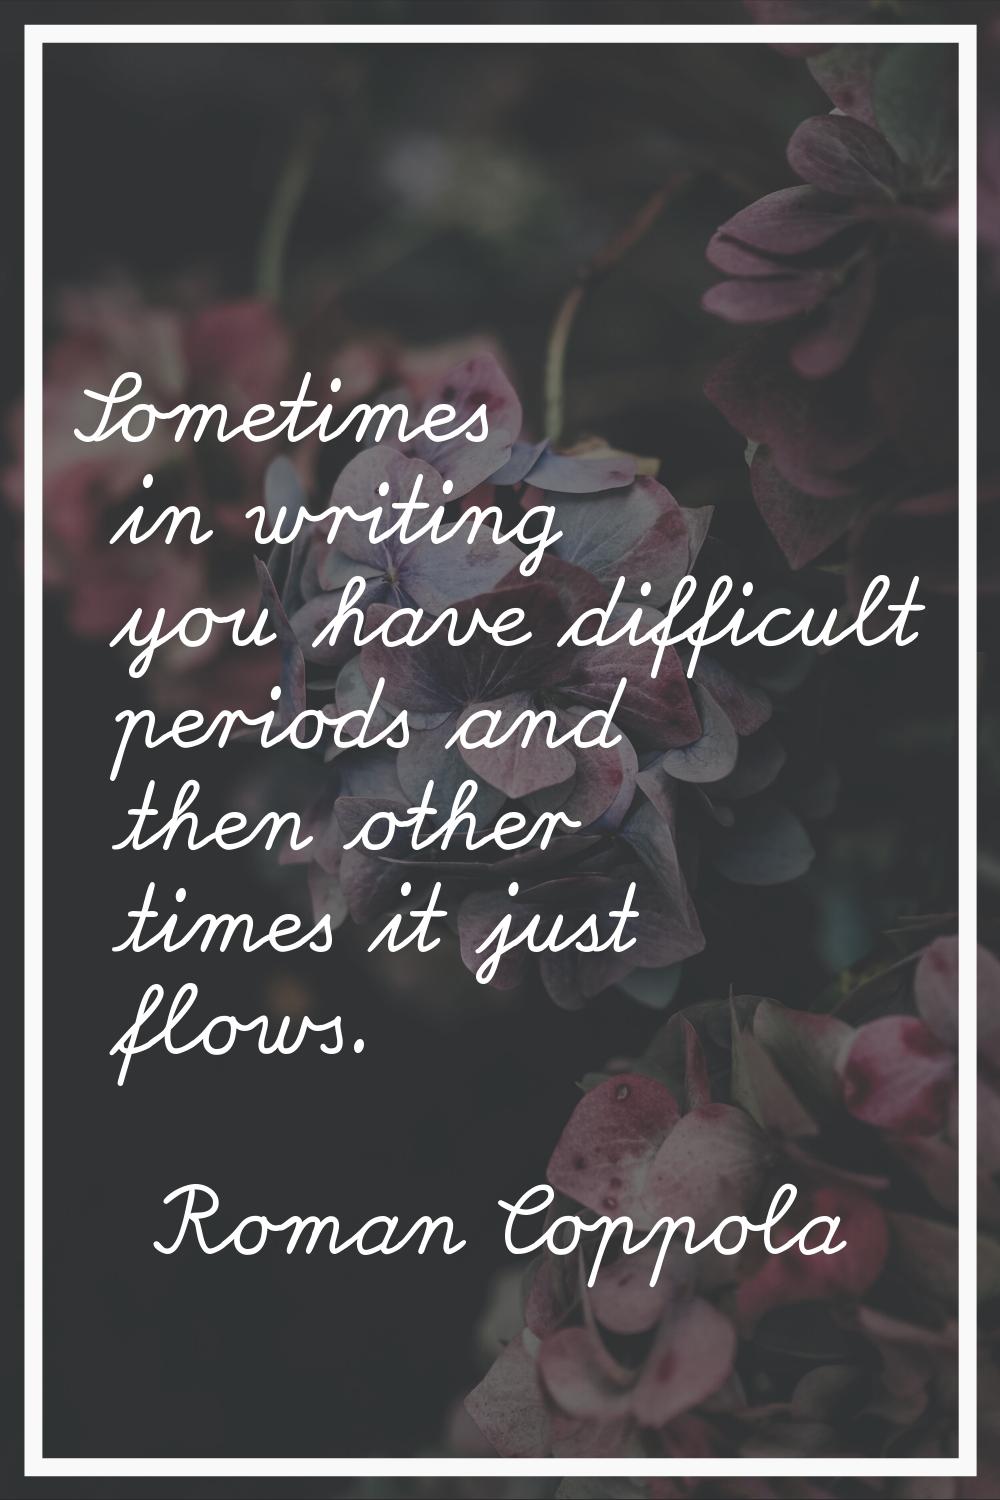 Sometimes in writing you have difficult periods and then other times it just flows.